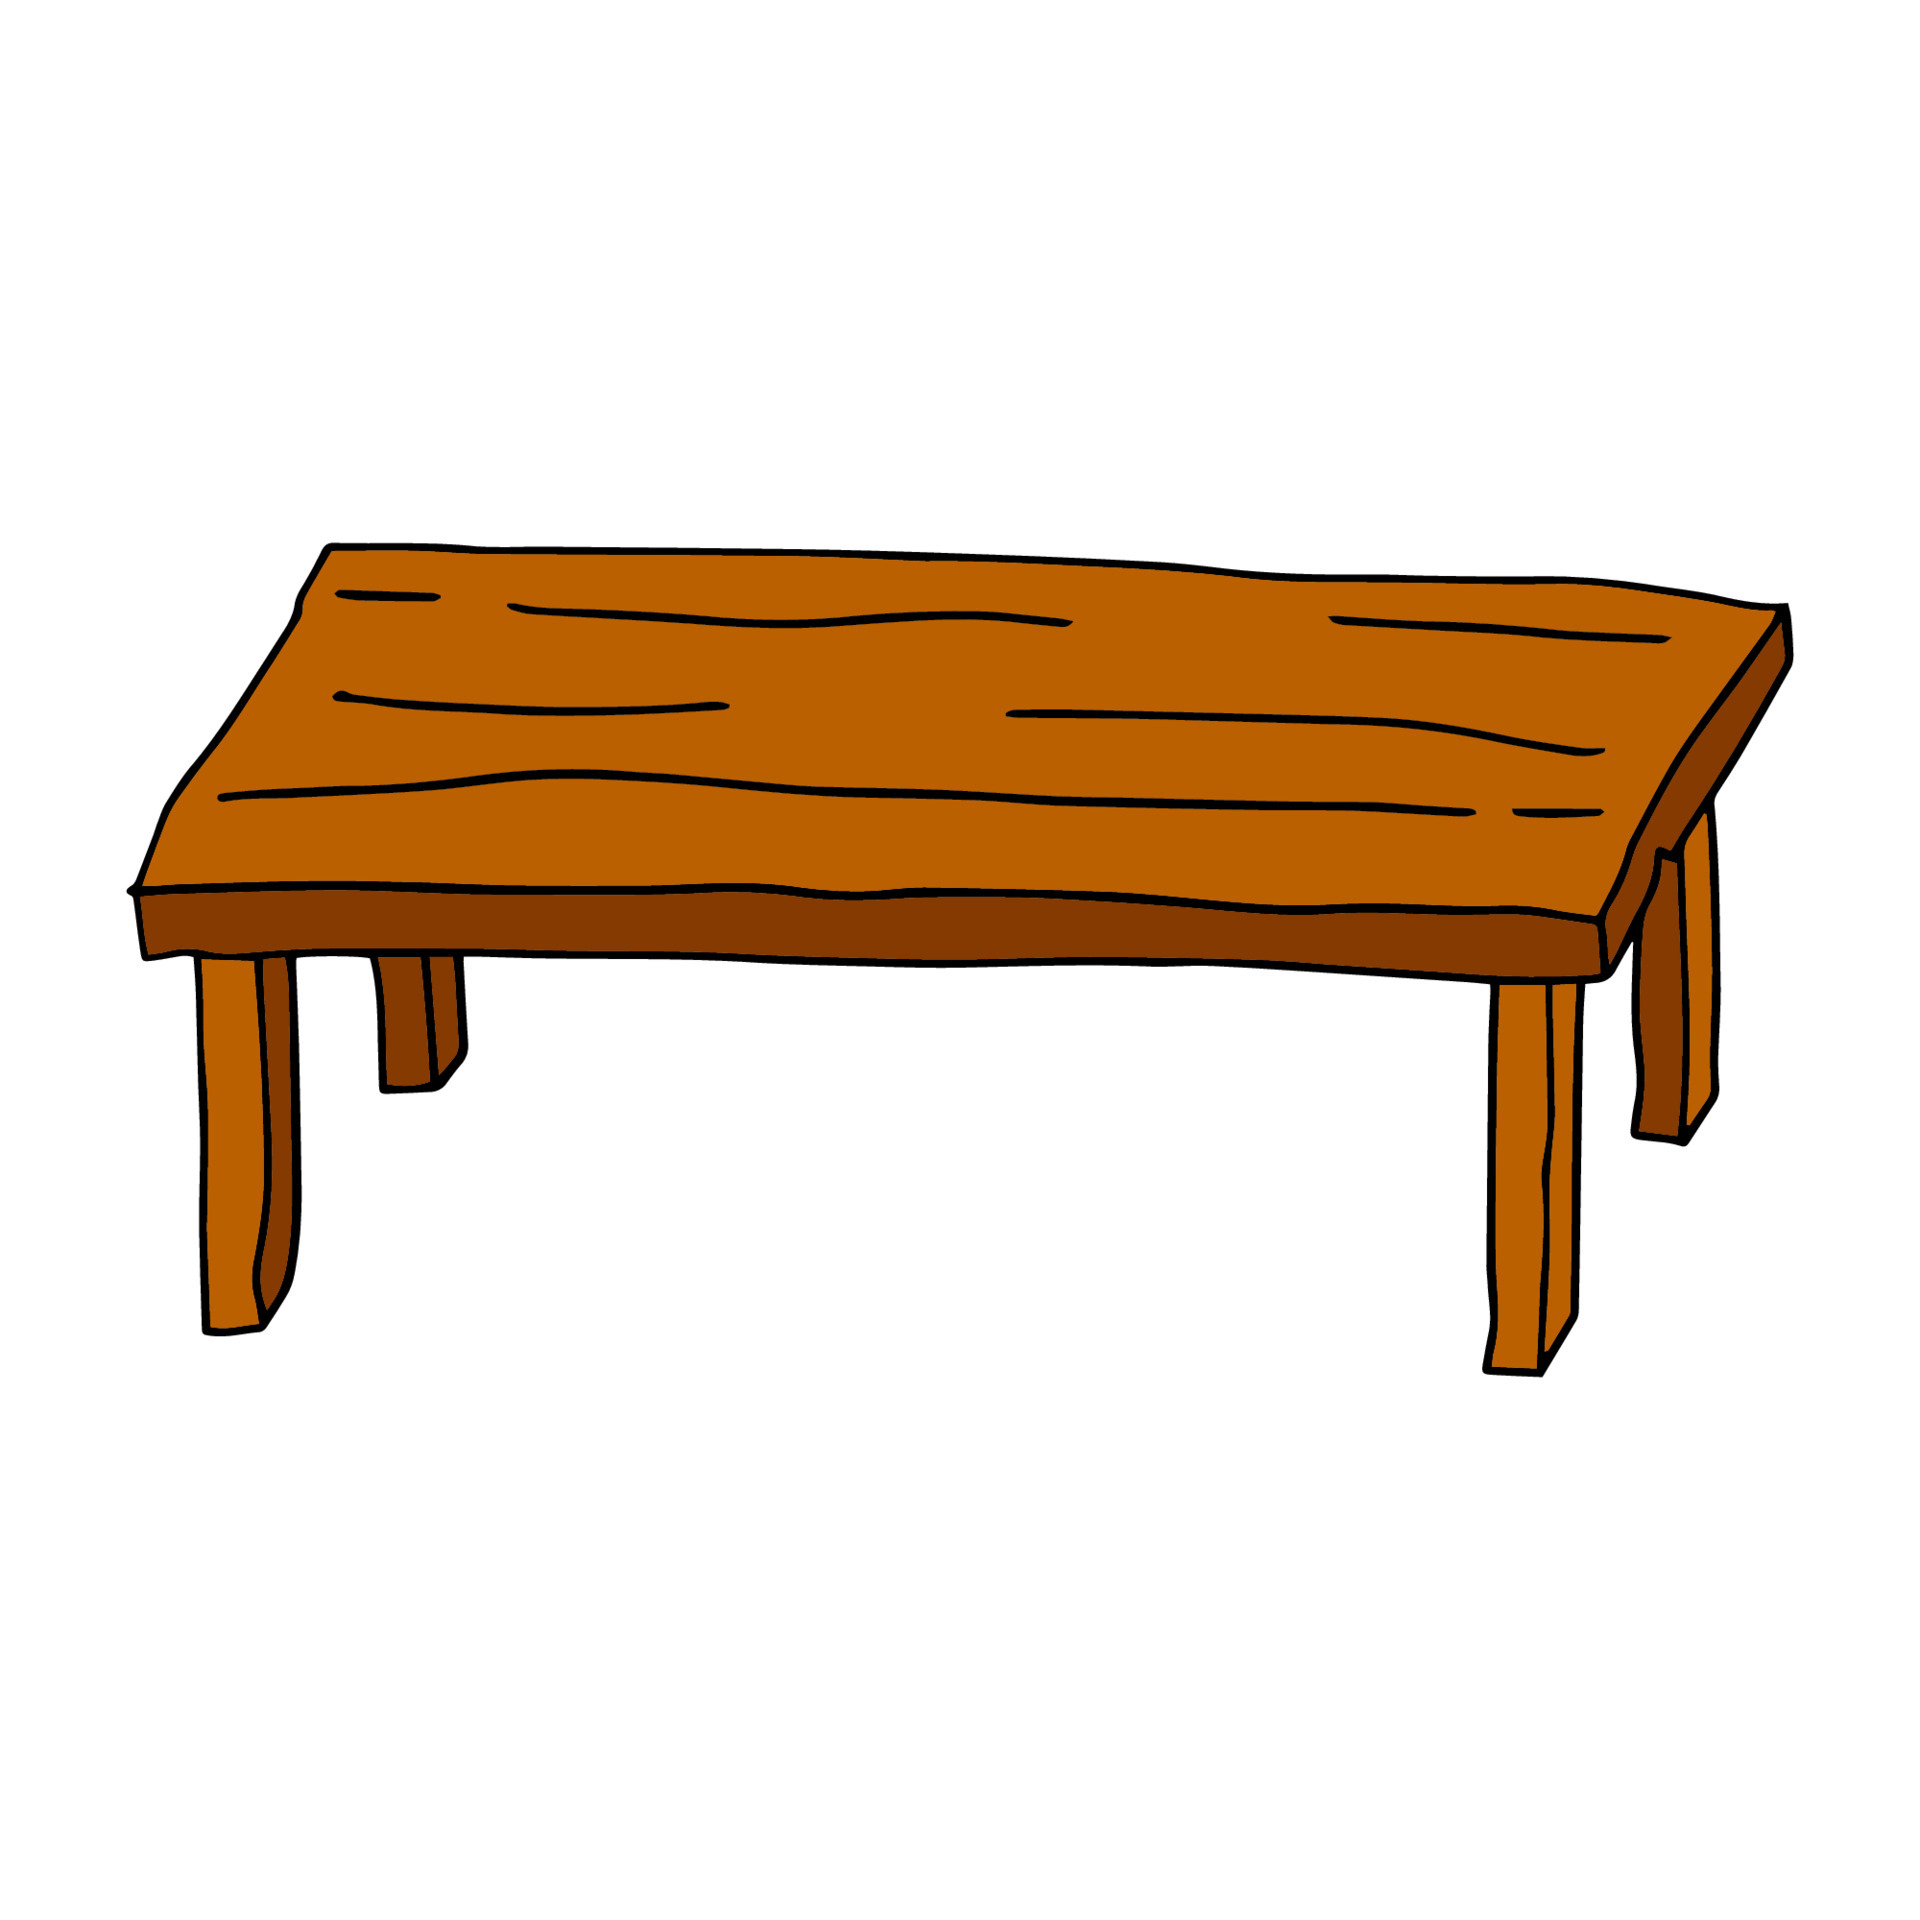 Bench Drawing Vector Images (over 3,700)